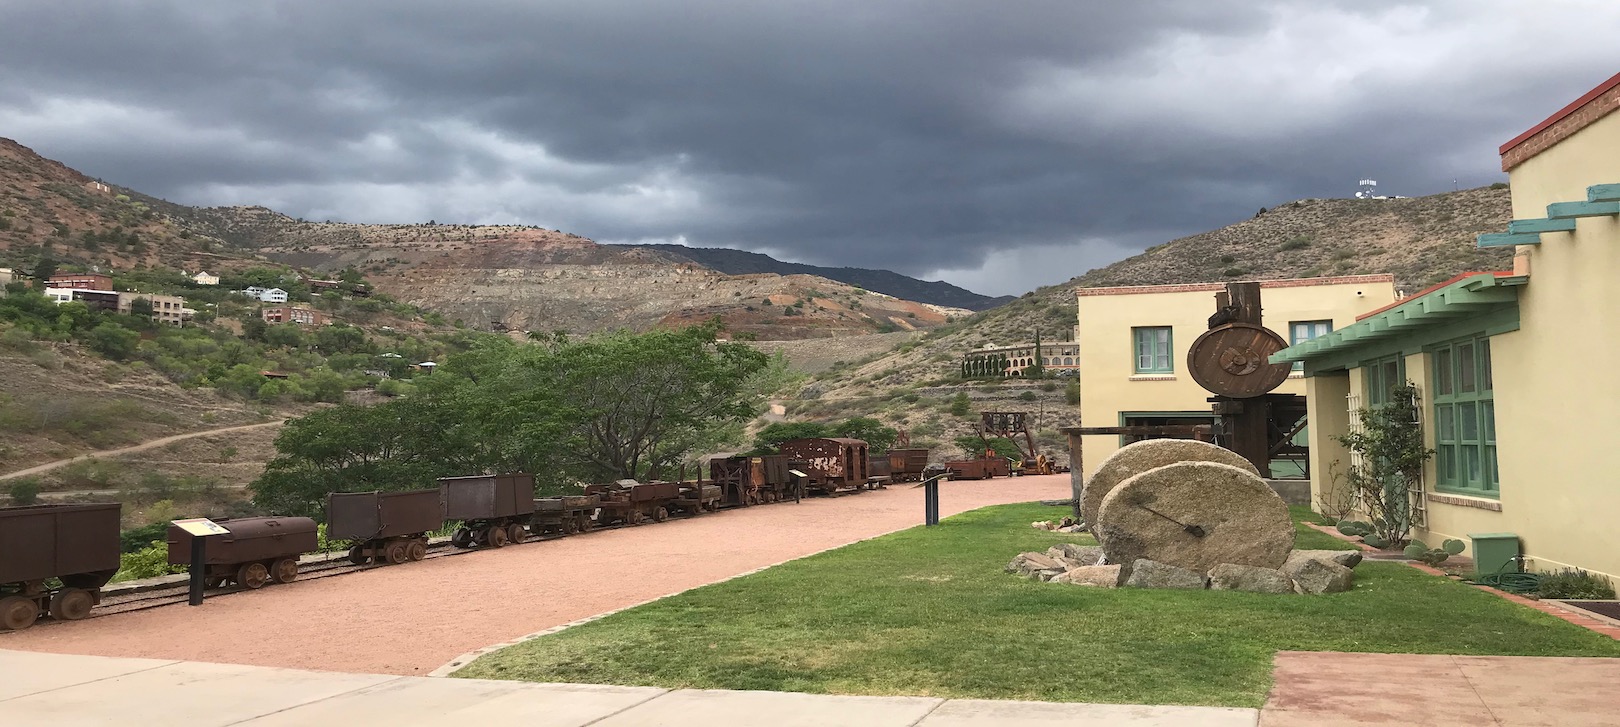 An outside view of the Douglas Mansion and some mining equipment at Jerome State Historic Park